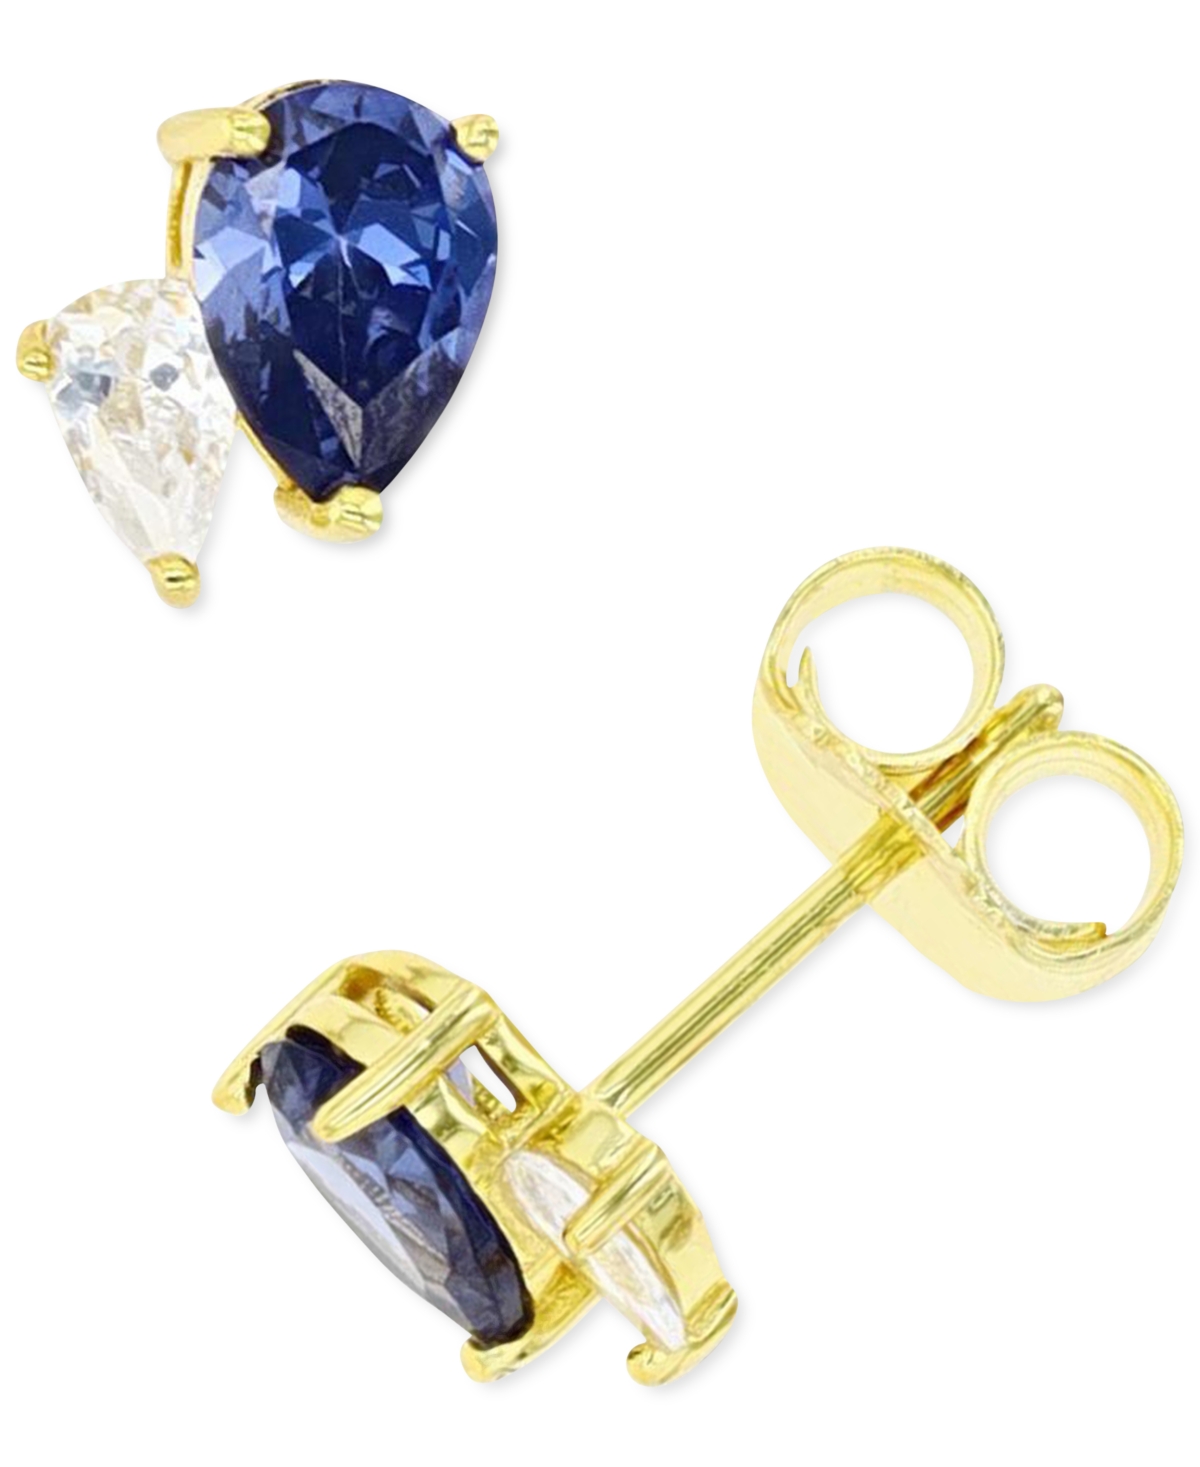 Macy's Blue And White Cubic Zirconia Stud Earrings In Sterling Silver Or 14k Gold Over Sterling Silver